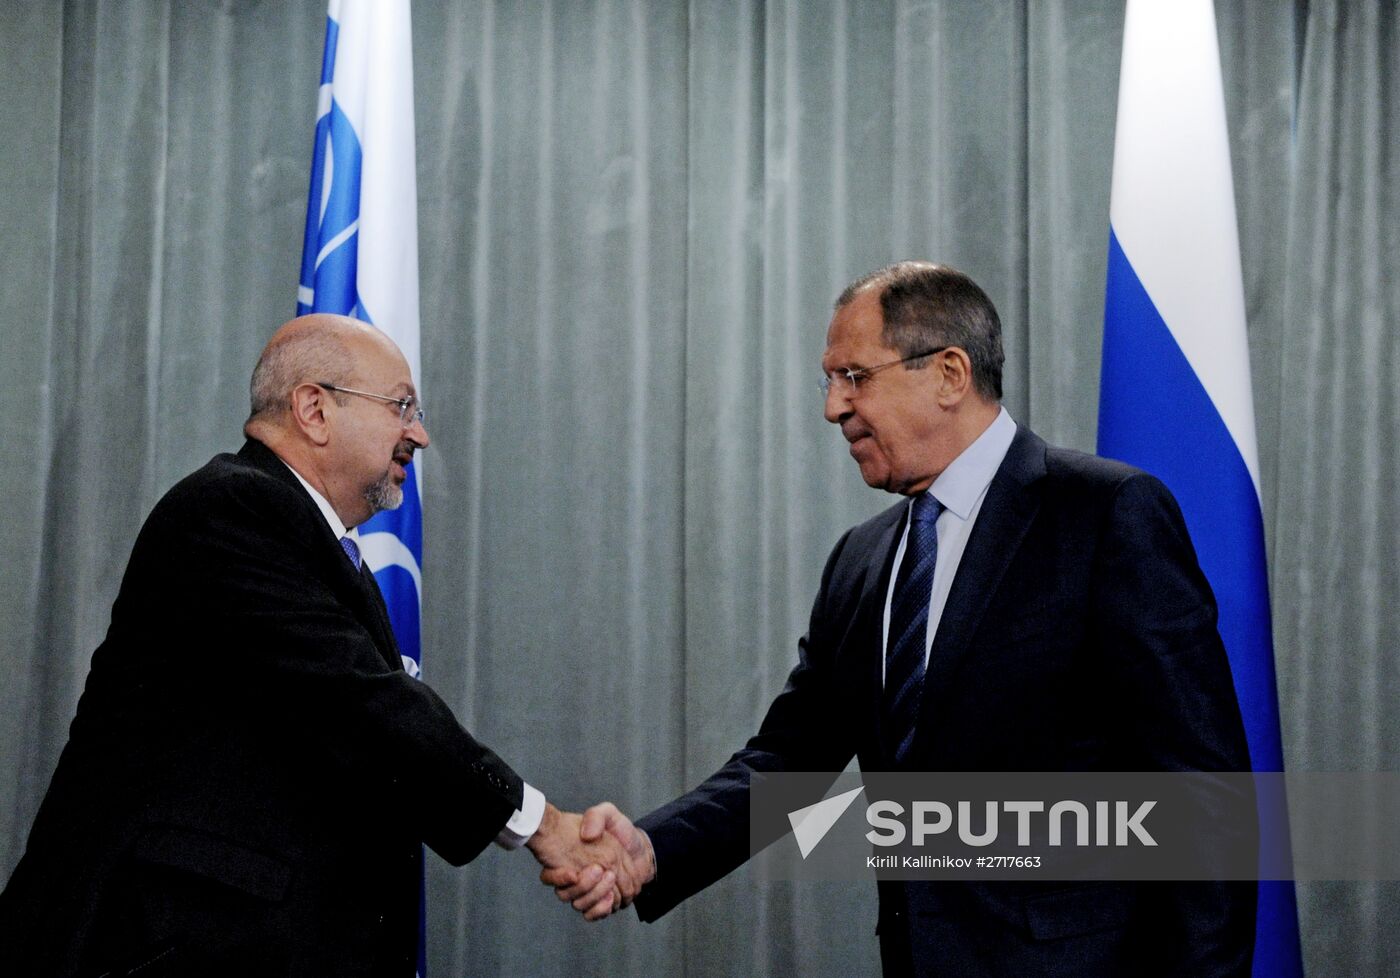 Russian Foreign Minister Sergei Lavrov meets with OSCE Secretary General Lamberto Zannier